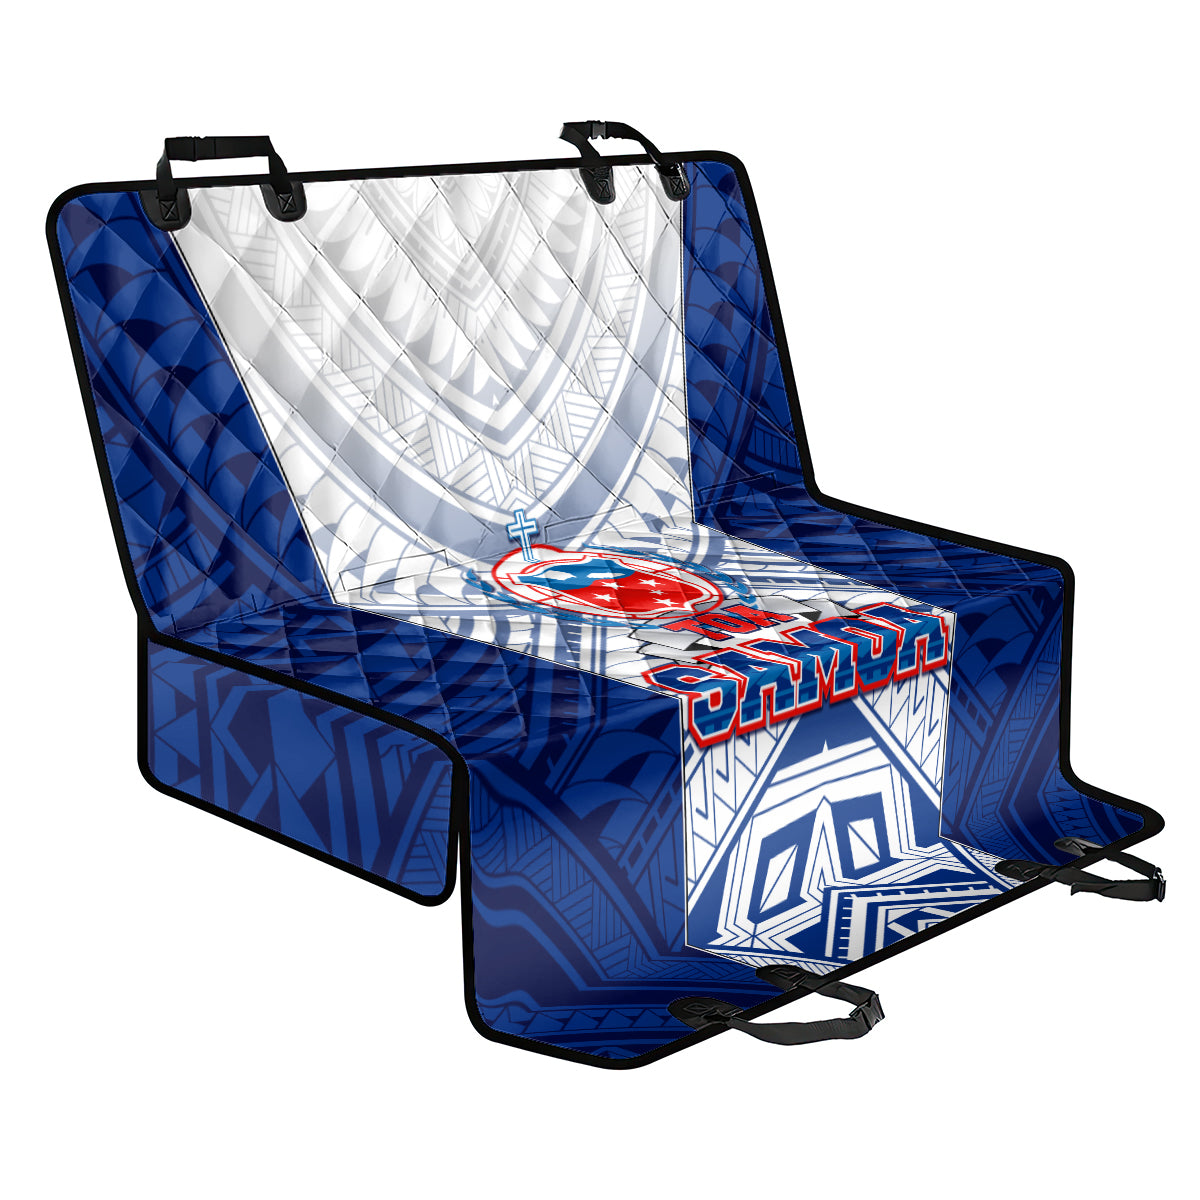 Samoa Rugby Back Car Seat Cover 2023 Pacific Championships Polynesian Pattern LT05 One Size Blue - Polynesian Pride